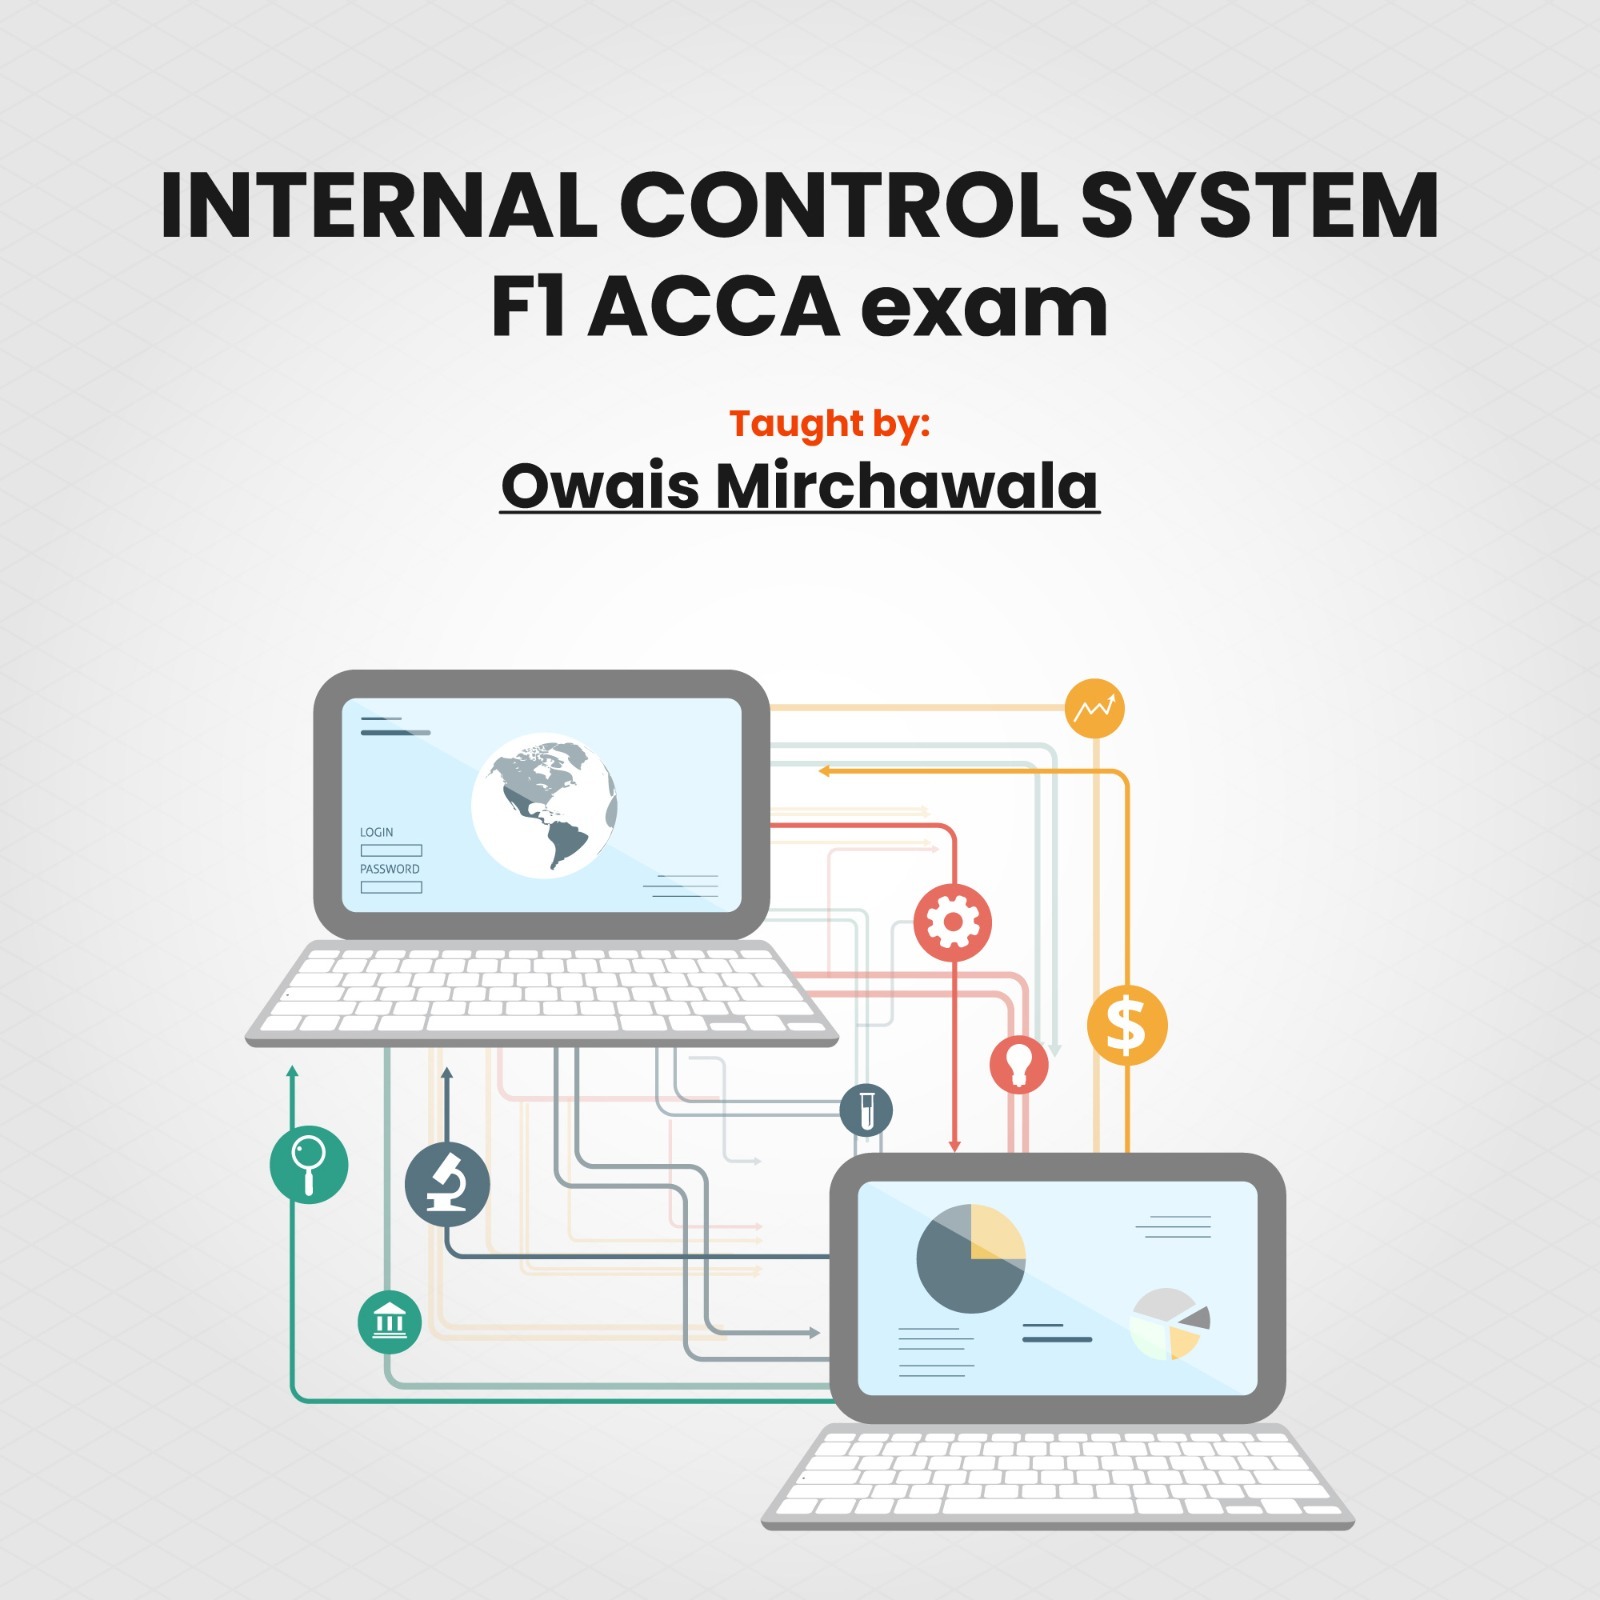 Internal Control Systems: A Significant Part of Business and Technology-F1